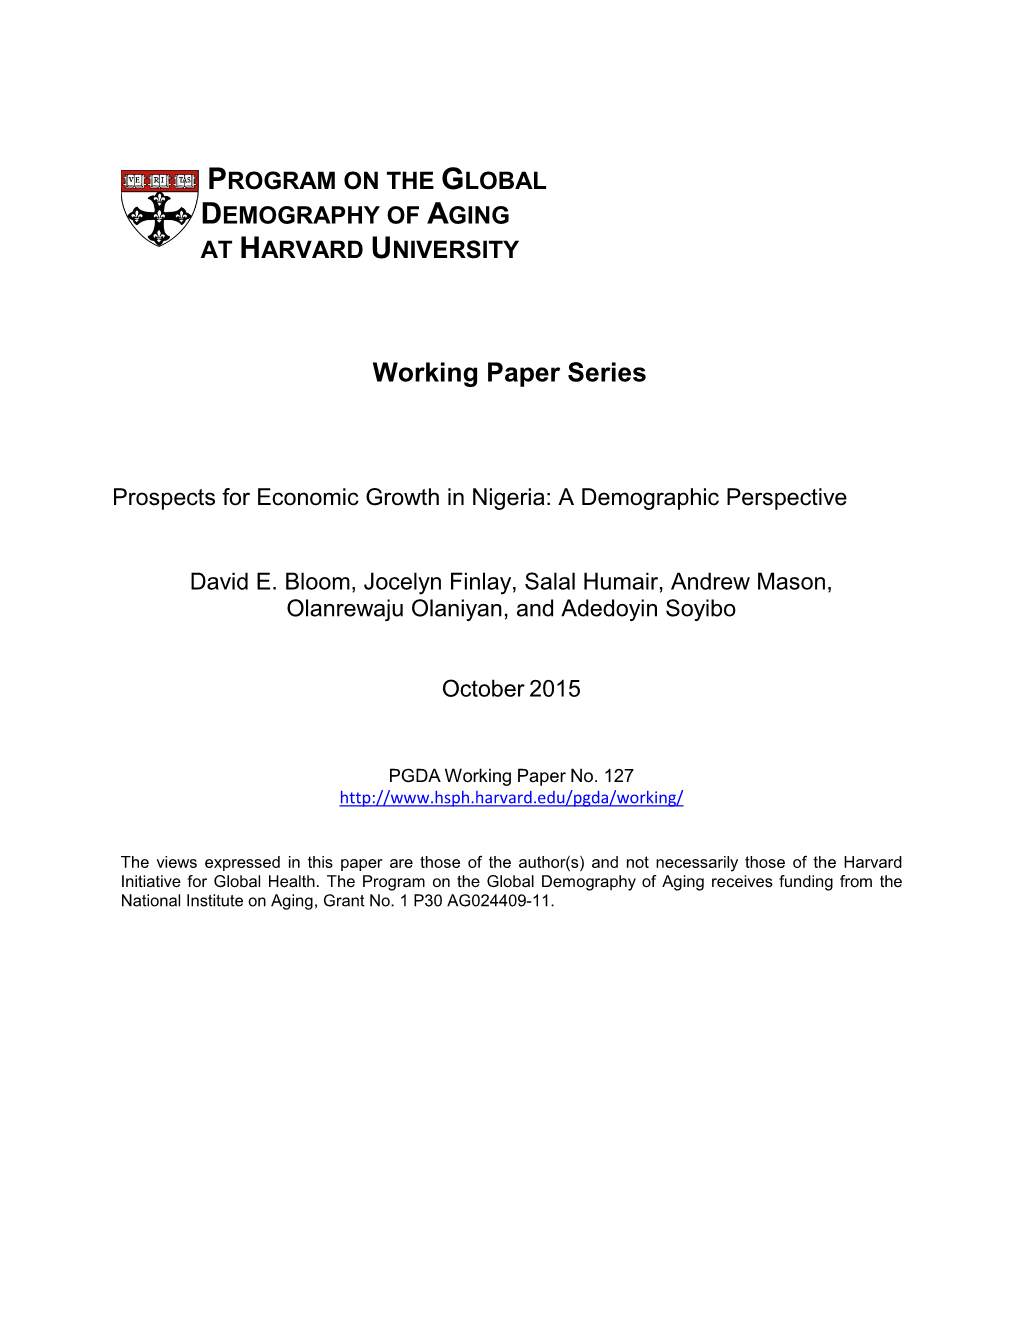 Prospects for Economic Growth in Nigeria: a Demographic Perspective